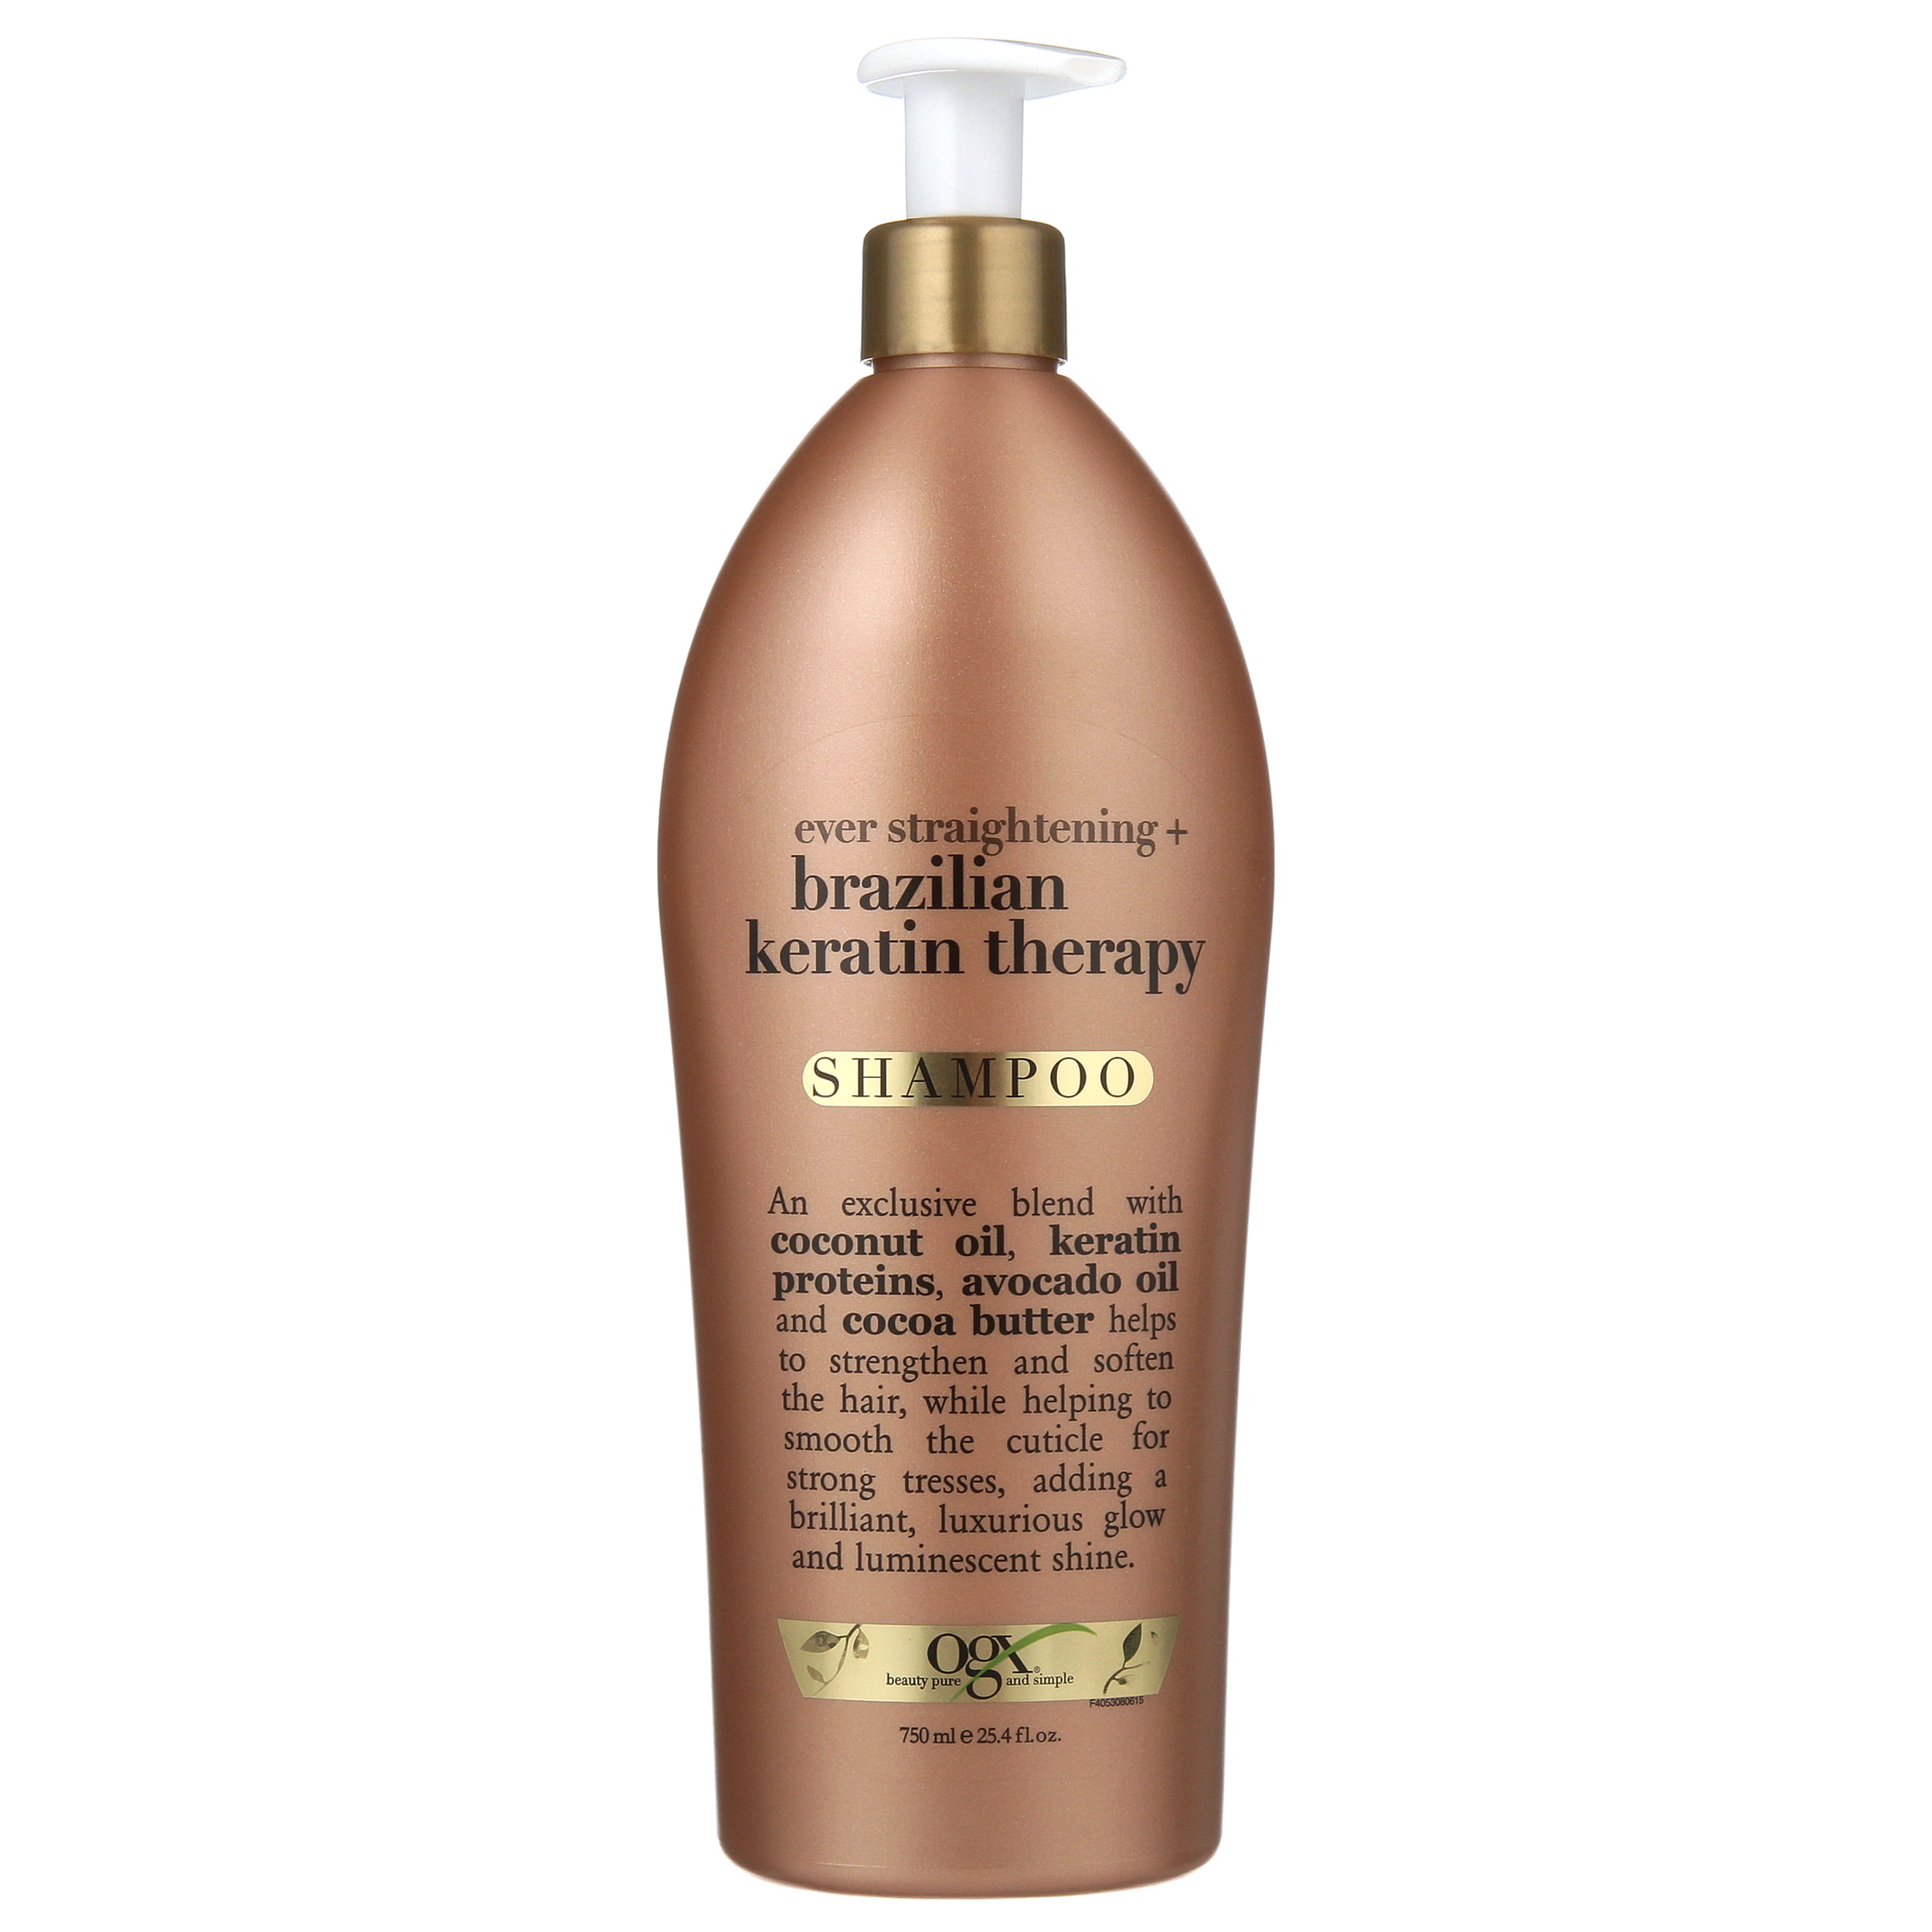 halstørklæde Glimte fascisme Ever Straightening + Brazilian Keratin Therapy Smoothing Shampoo with  Coconut Oil, Cocoa Butter & Avocado Oil for Lustrous, Shiny Hair, Paraben- Free, Sulfate-Free Surfactants, 25.4 Fl Oz - Walmart.com